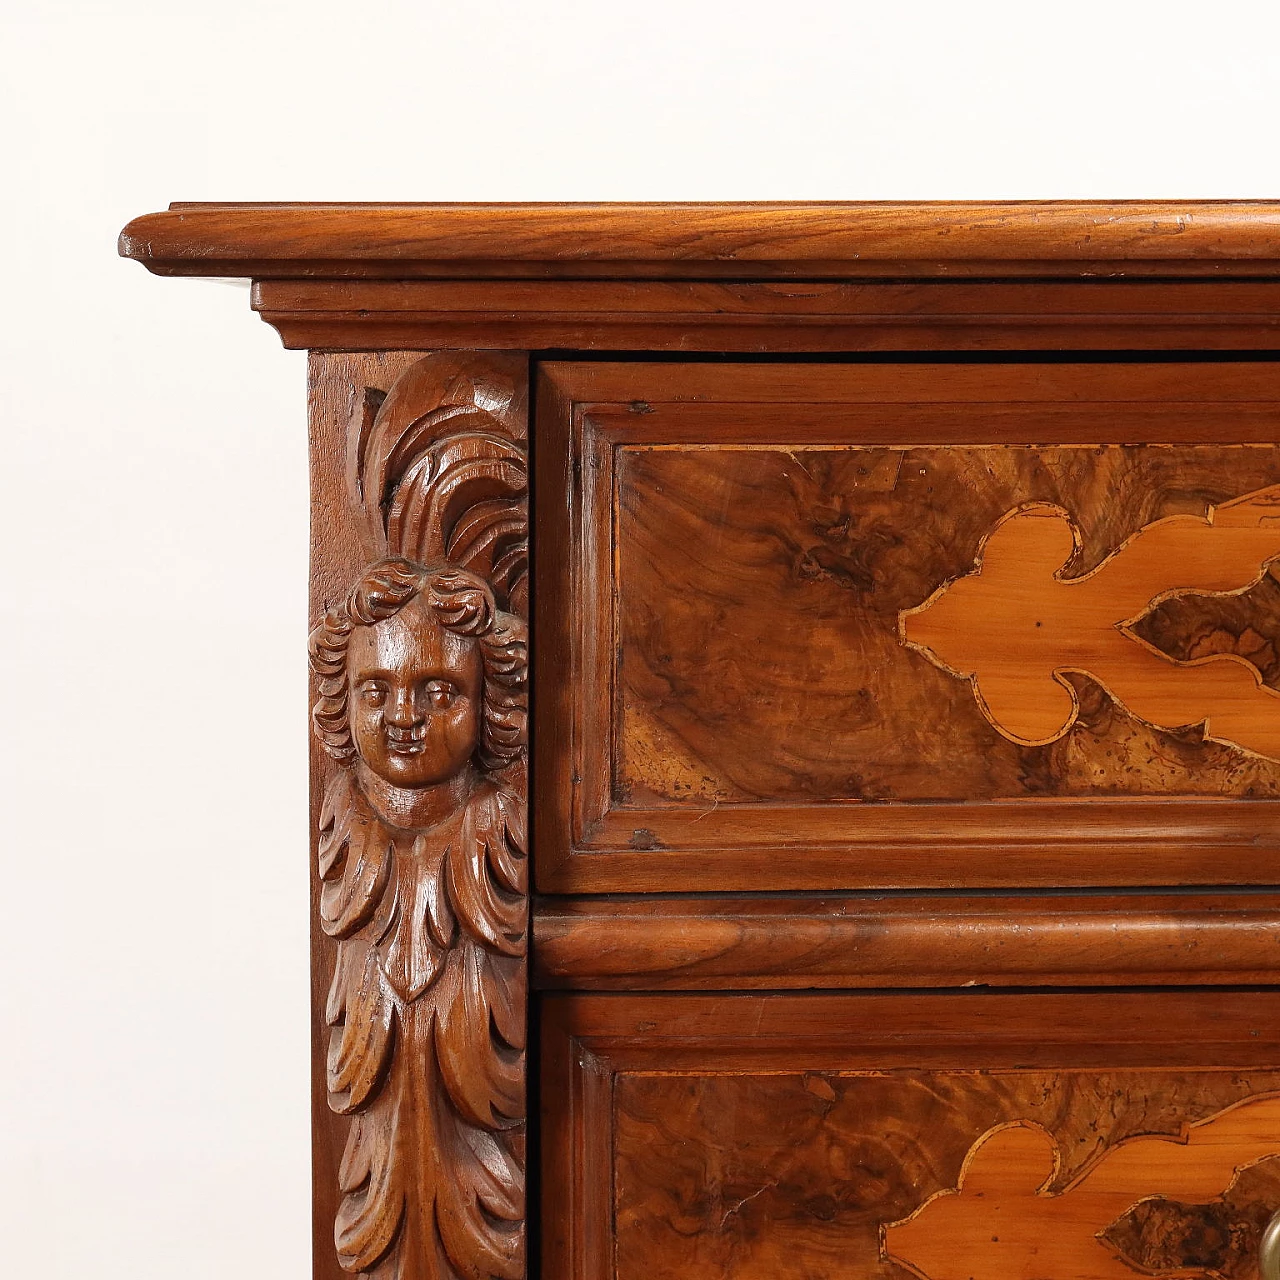 Bergamasque Baroque walnut-root canterano with cherrywood inlays and maple purfling, early 18th century 4